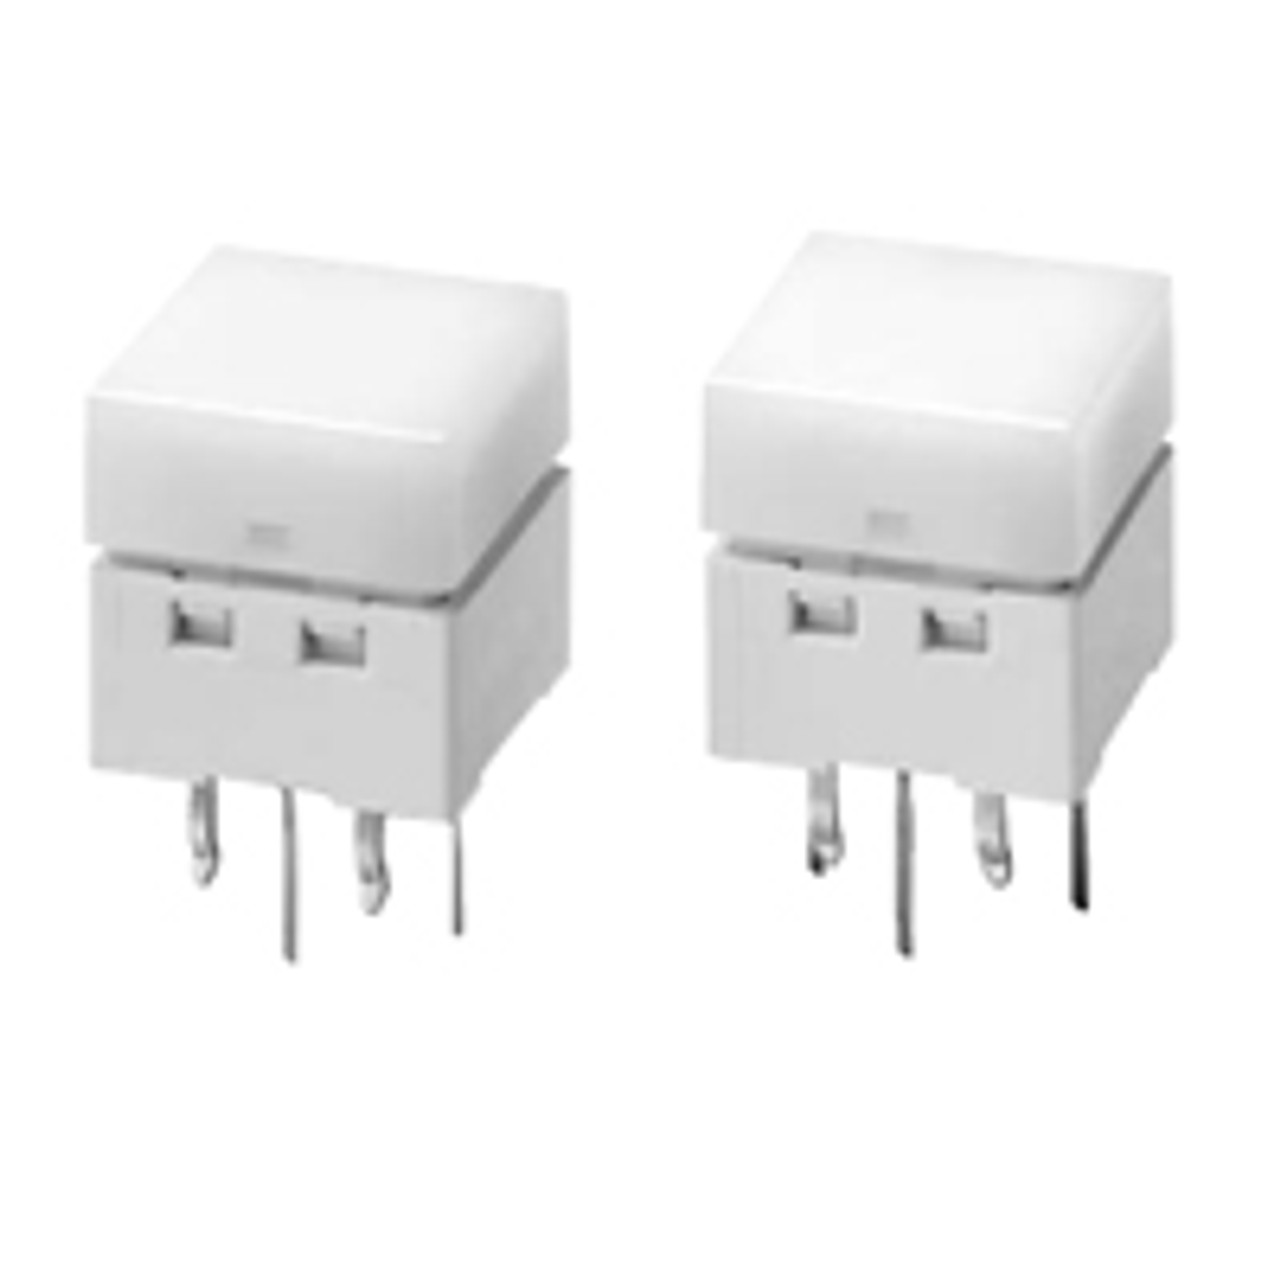 Omron B3W-9012-G2N Tactile Switches